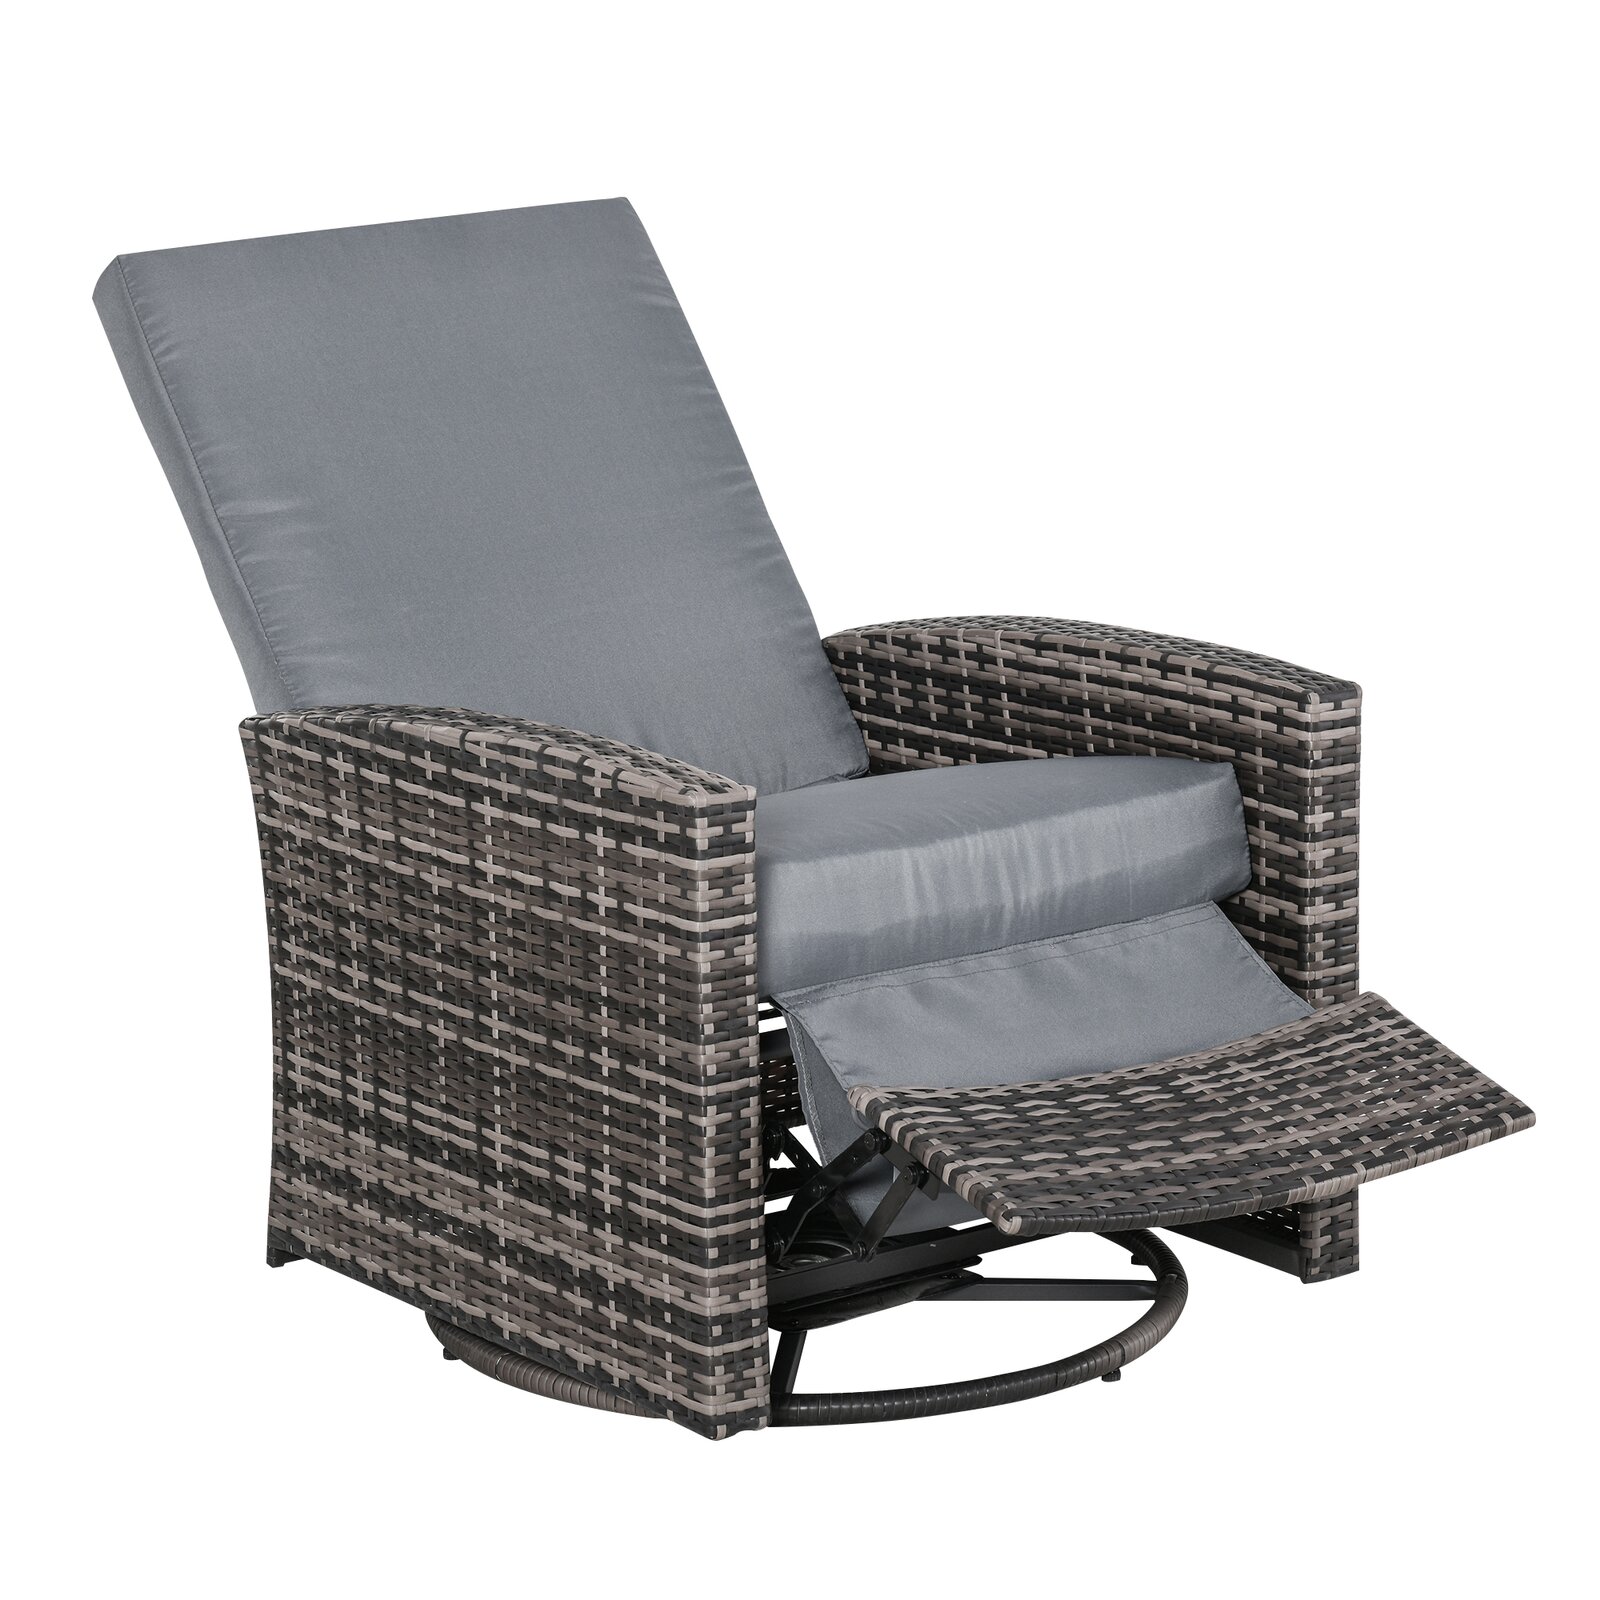 Harrill Swivel Recliner Patio Chair with Cushions, Reclining: Yes, Outer Frame Material: Wicker/Rattan - image 5 of 5